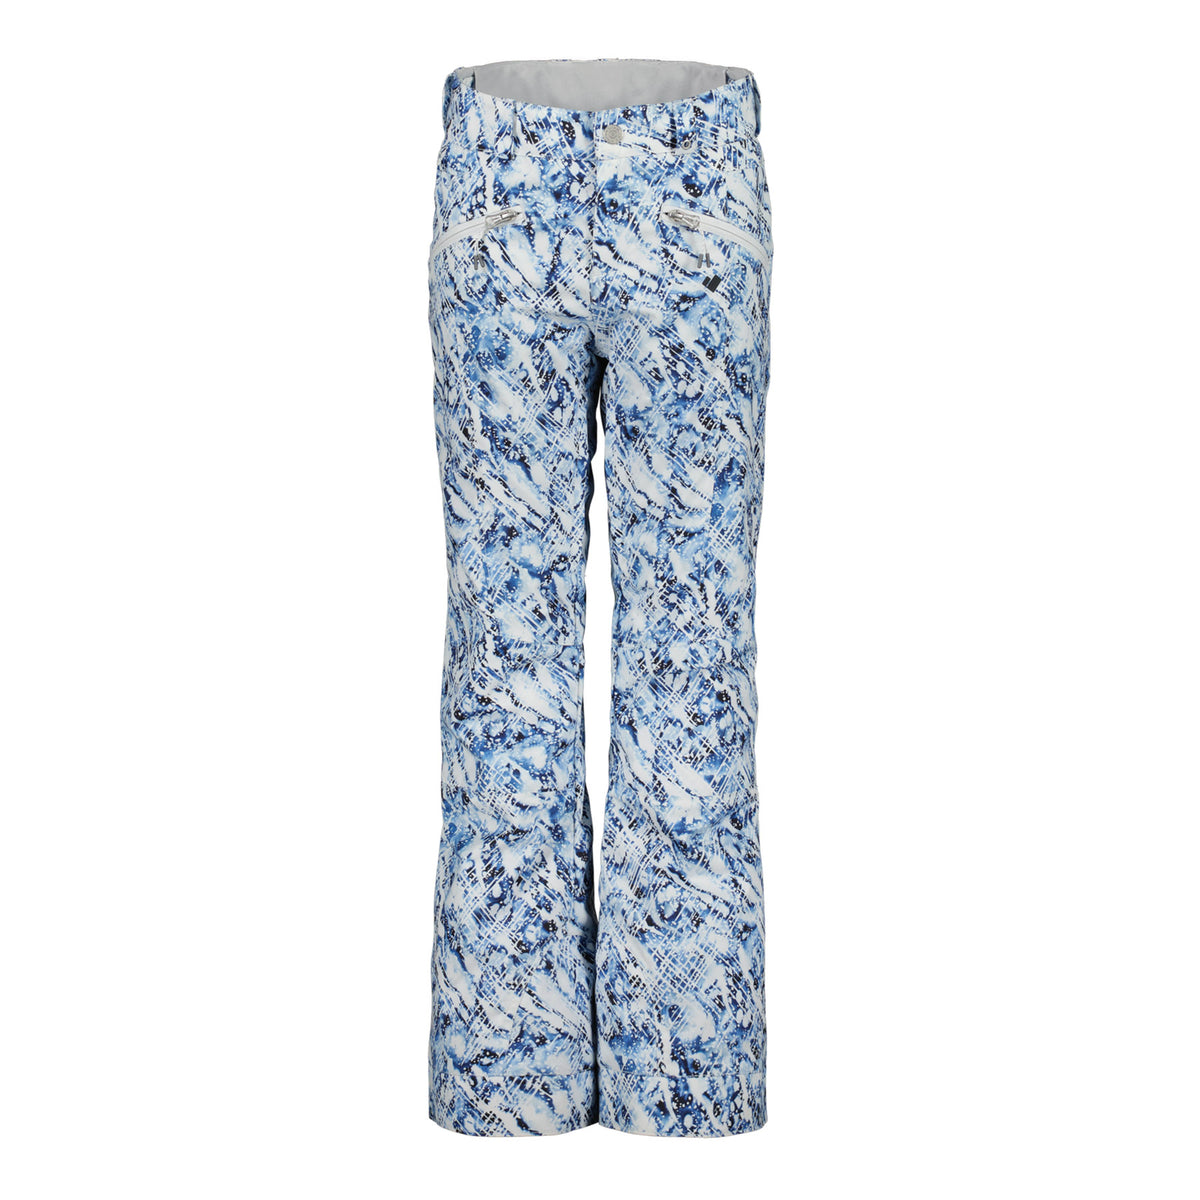 Hero image featuring the front of the Obermeyer Jessi Print Pants in verglas light blue and white.